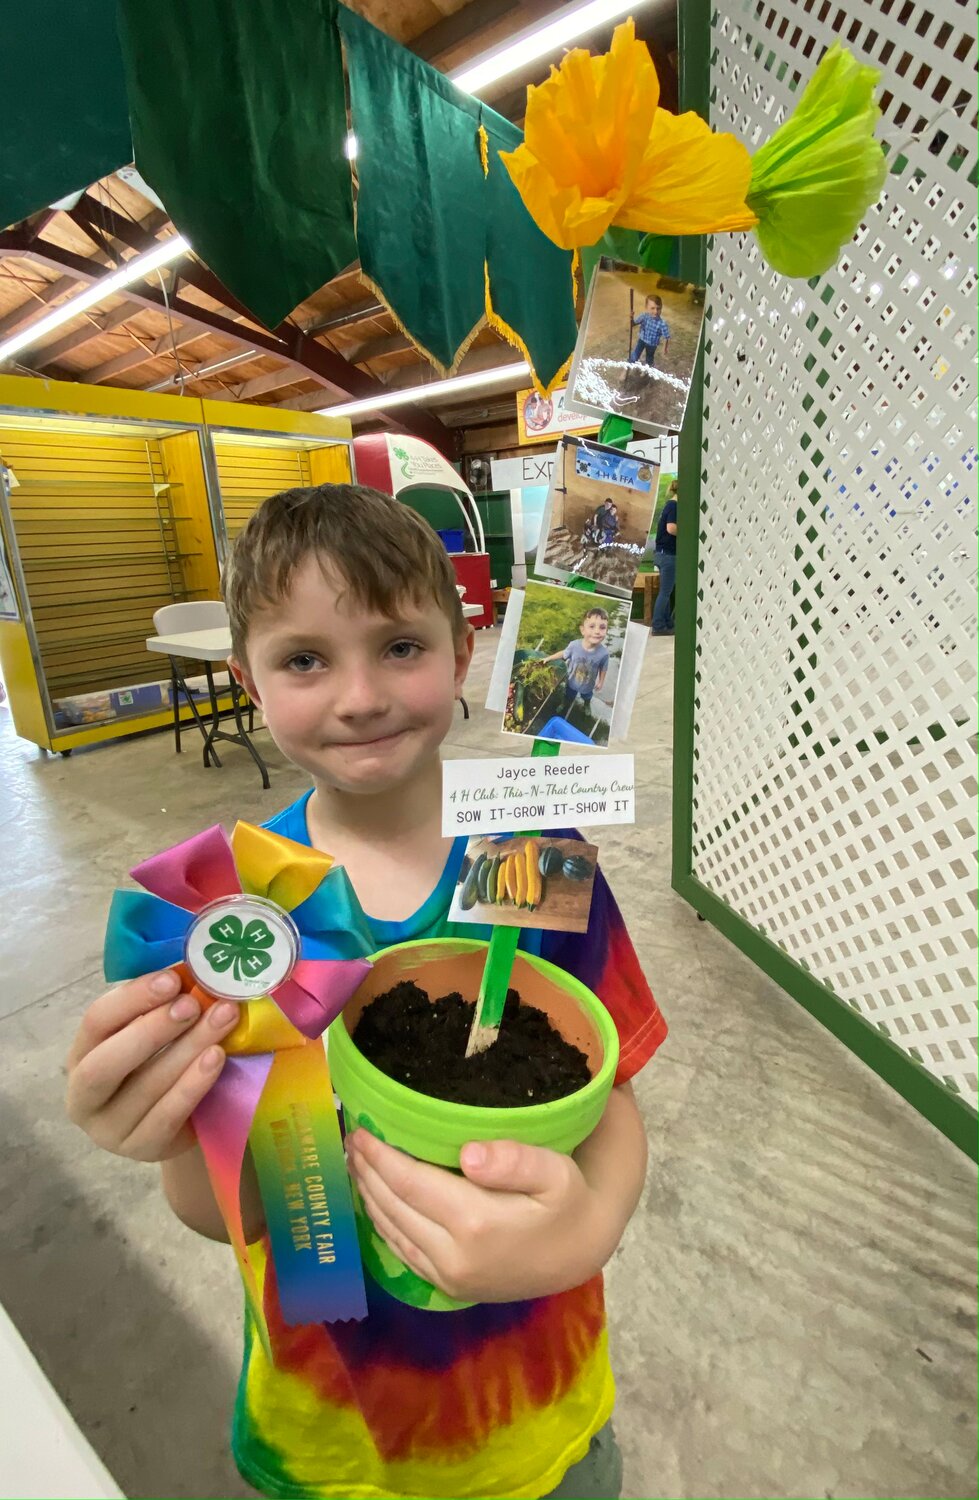 Jayce Reeder, 5, of Oxford, won a ribbon for his “Sow it-Grow it-Show it” flower pot exhibit at the Delaware County Fair, Sunday, Aug. 13.